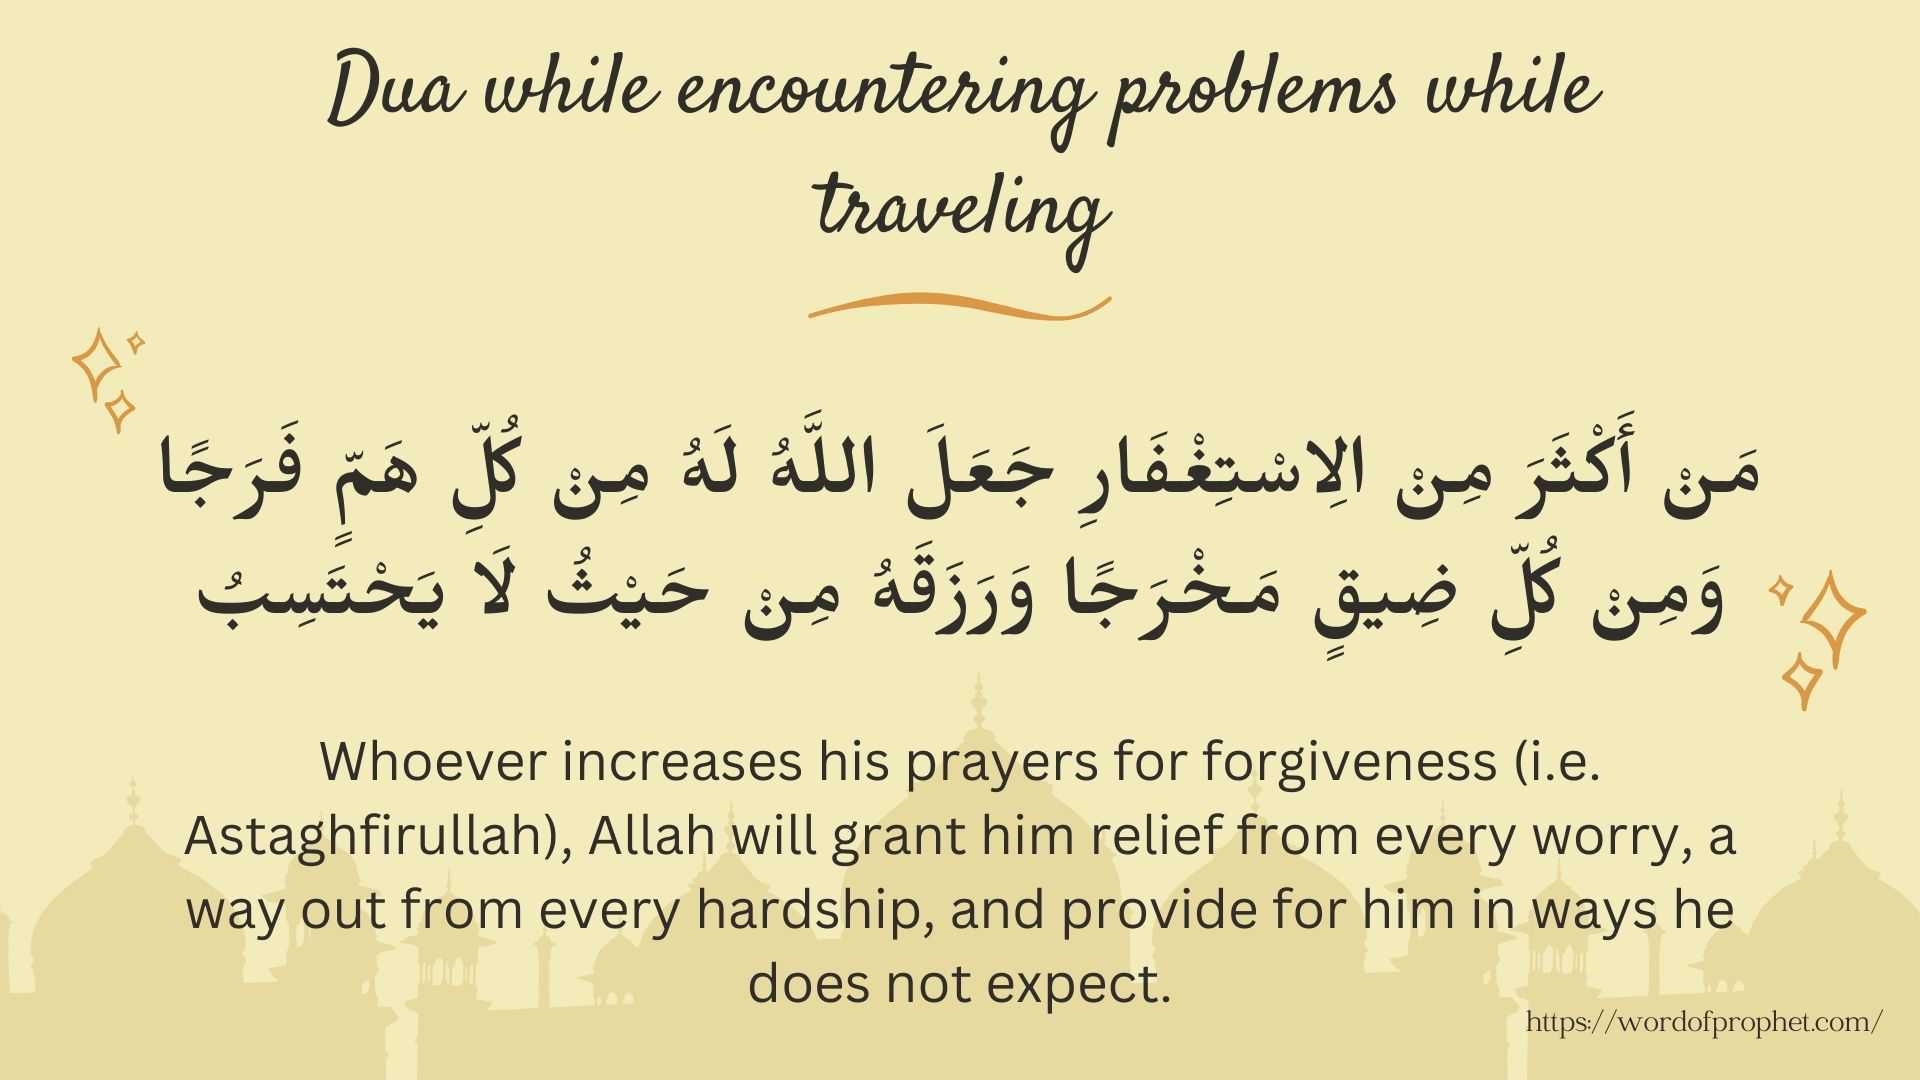 Dua while encountering problems while traveling